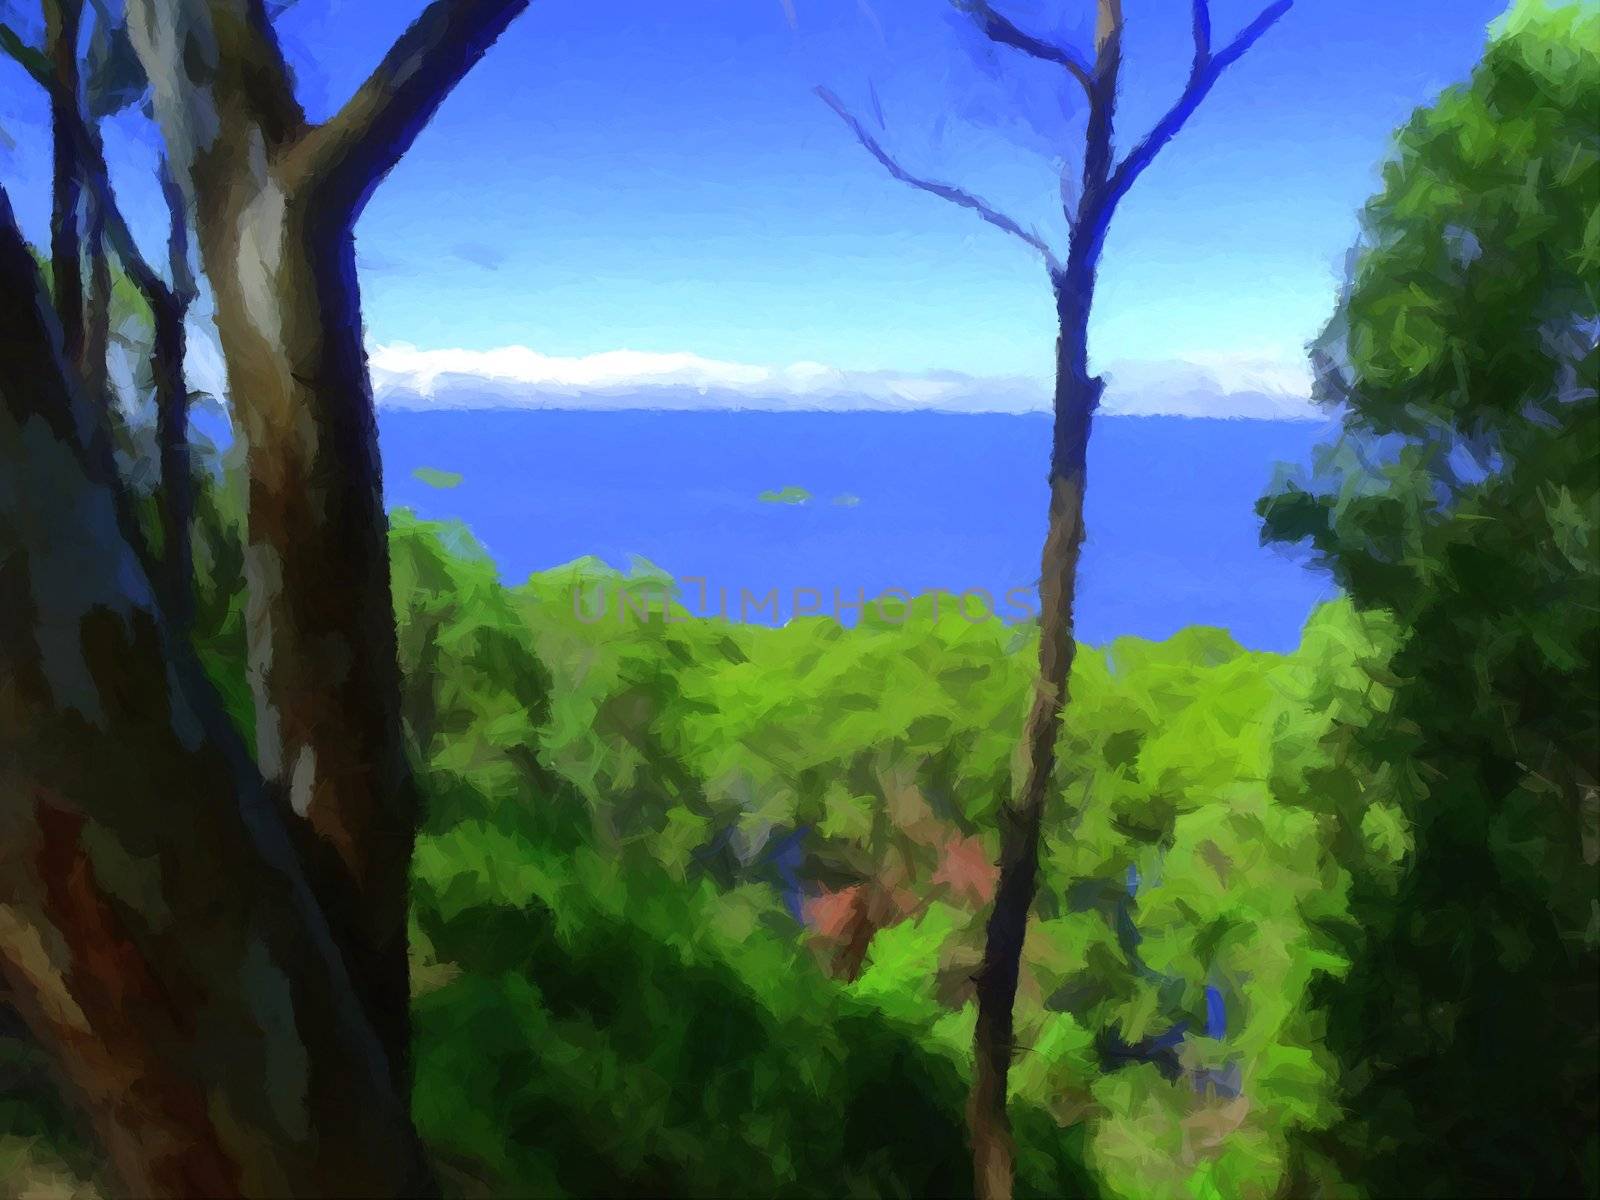 Painting of a great view from a cliff